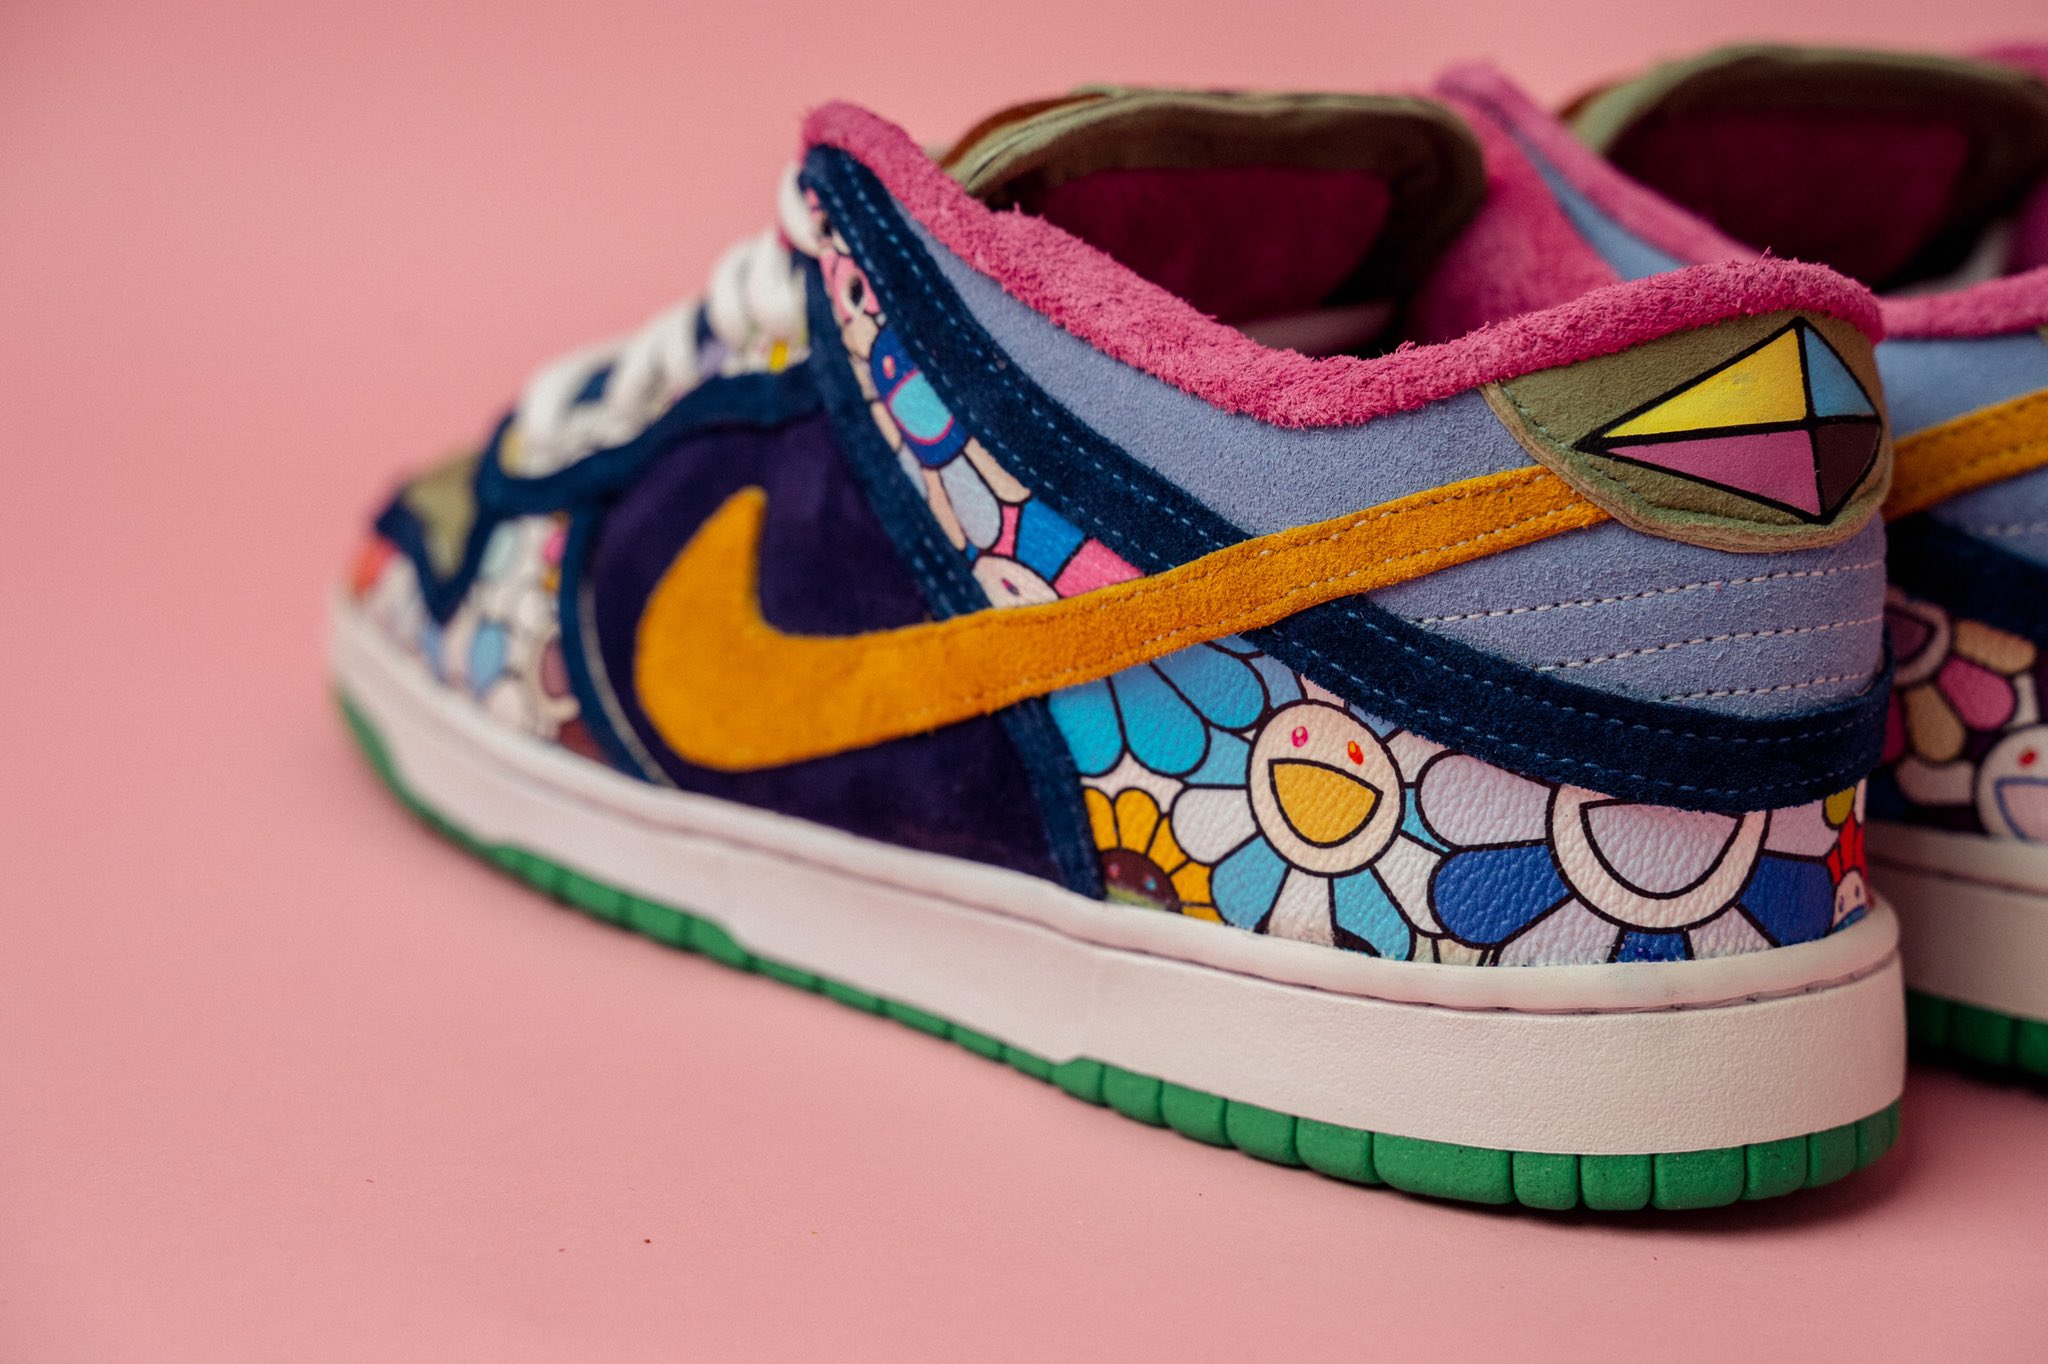 Takashi Murakami x Nike SB Dunk Low, This Takashi Murakami x Nike SB Dunk  Low custom is FIRE Would you cop? 🔥 🎥: marianocustoms, By The Sole  Supplier